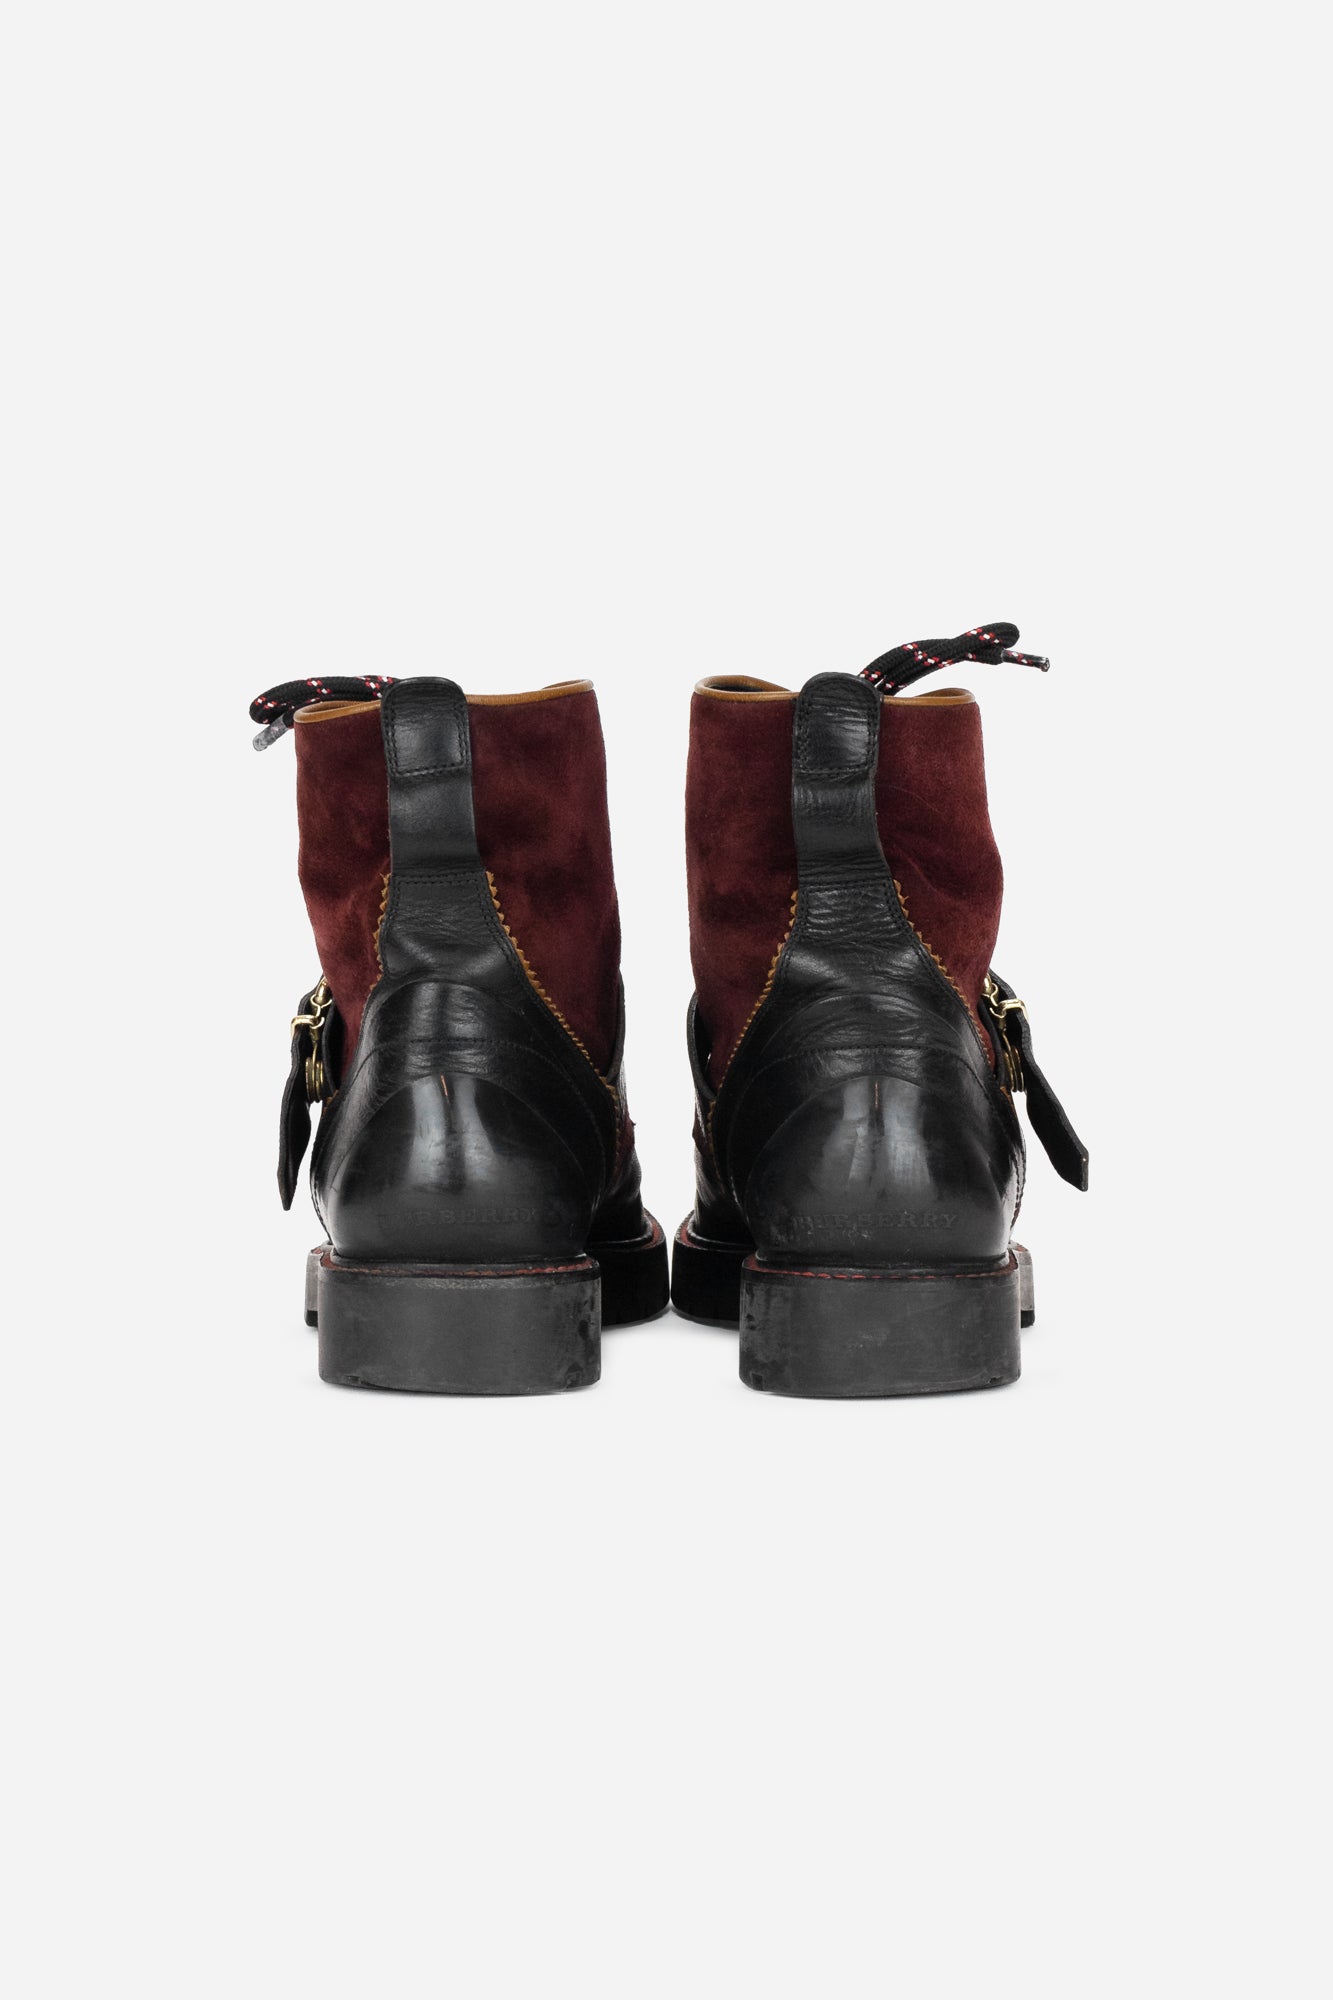 Burgundy Leather Color block Pattern Combat Boots suede/ leather